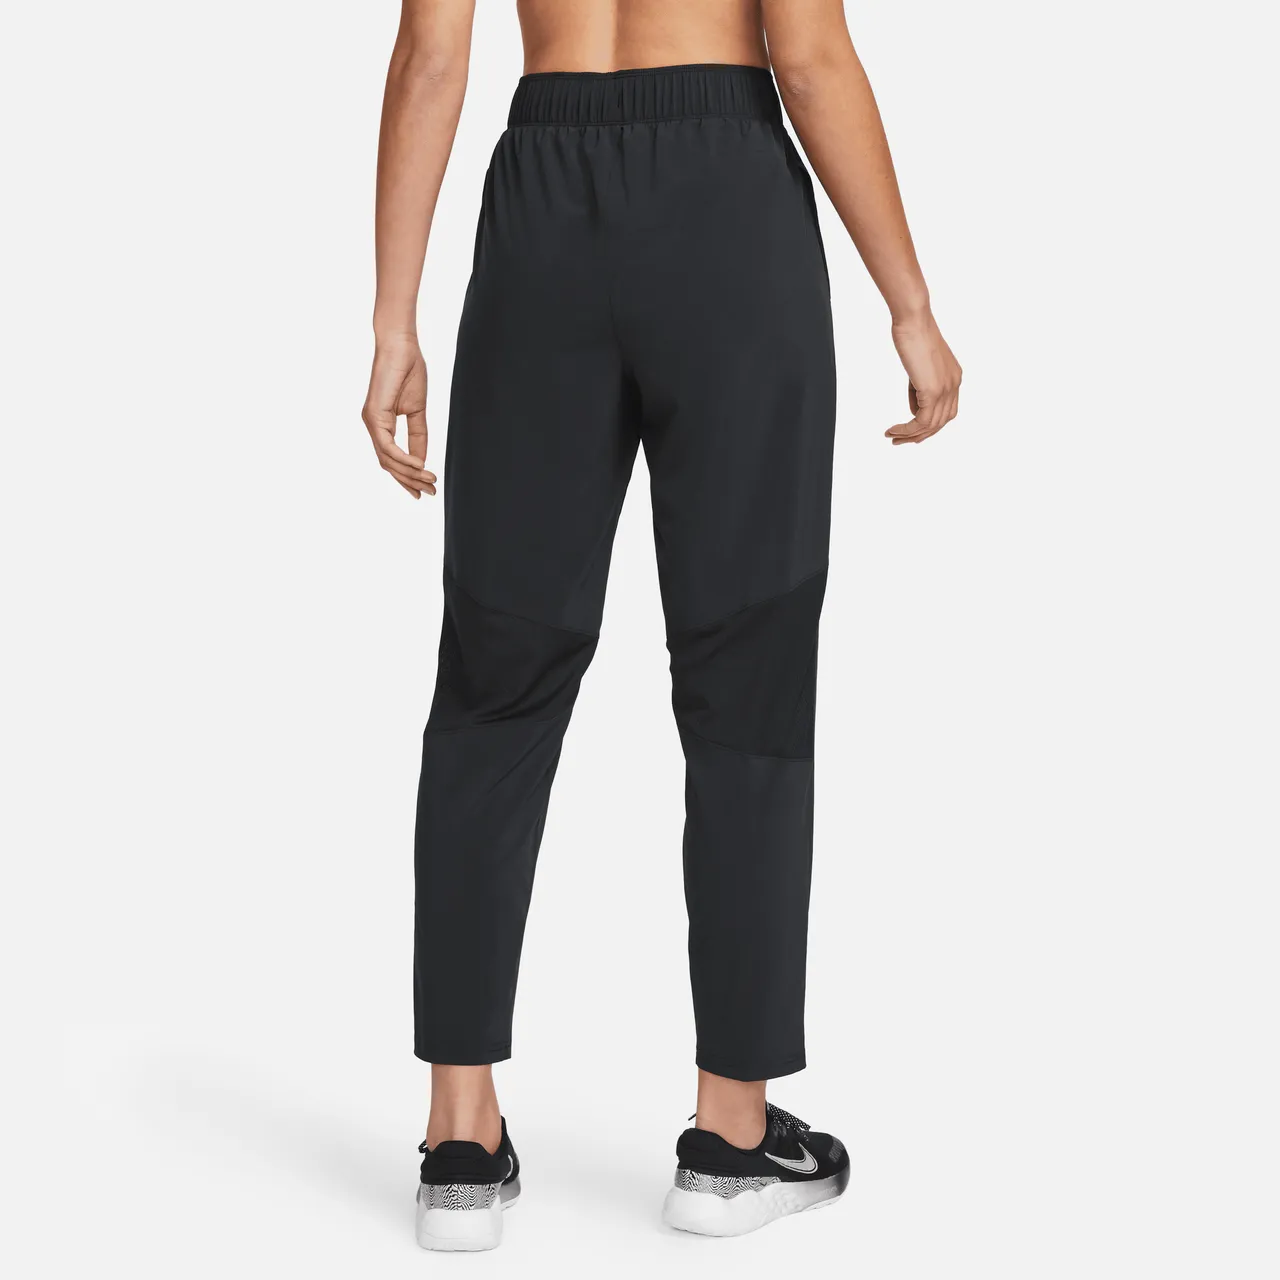 Nike Dri-FIT Fast Women's Mid-Rise 7/8 Running Trousers - Black - Polyester